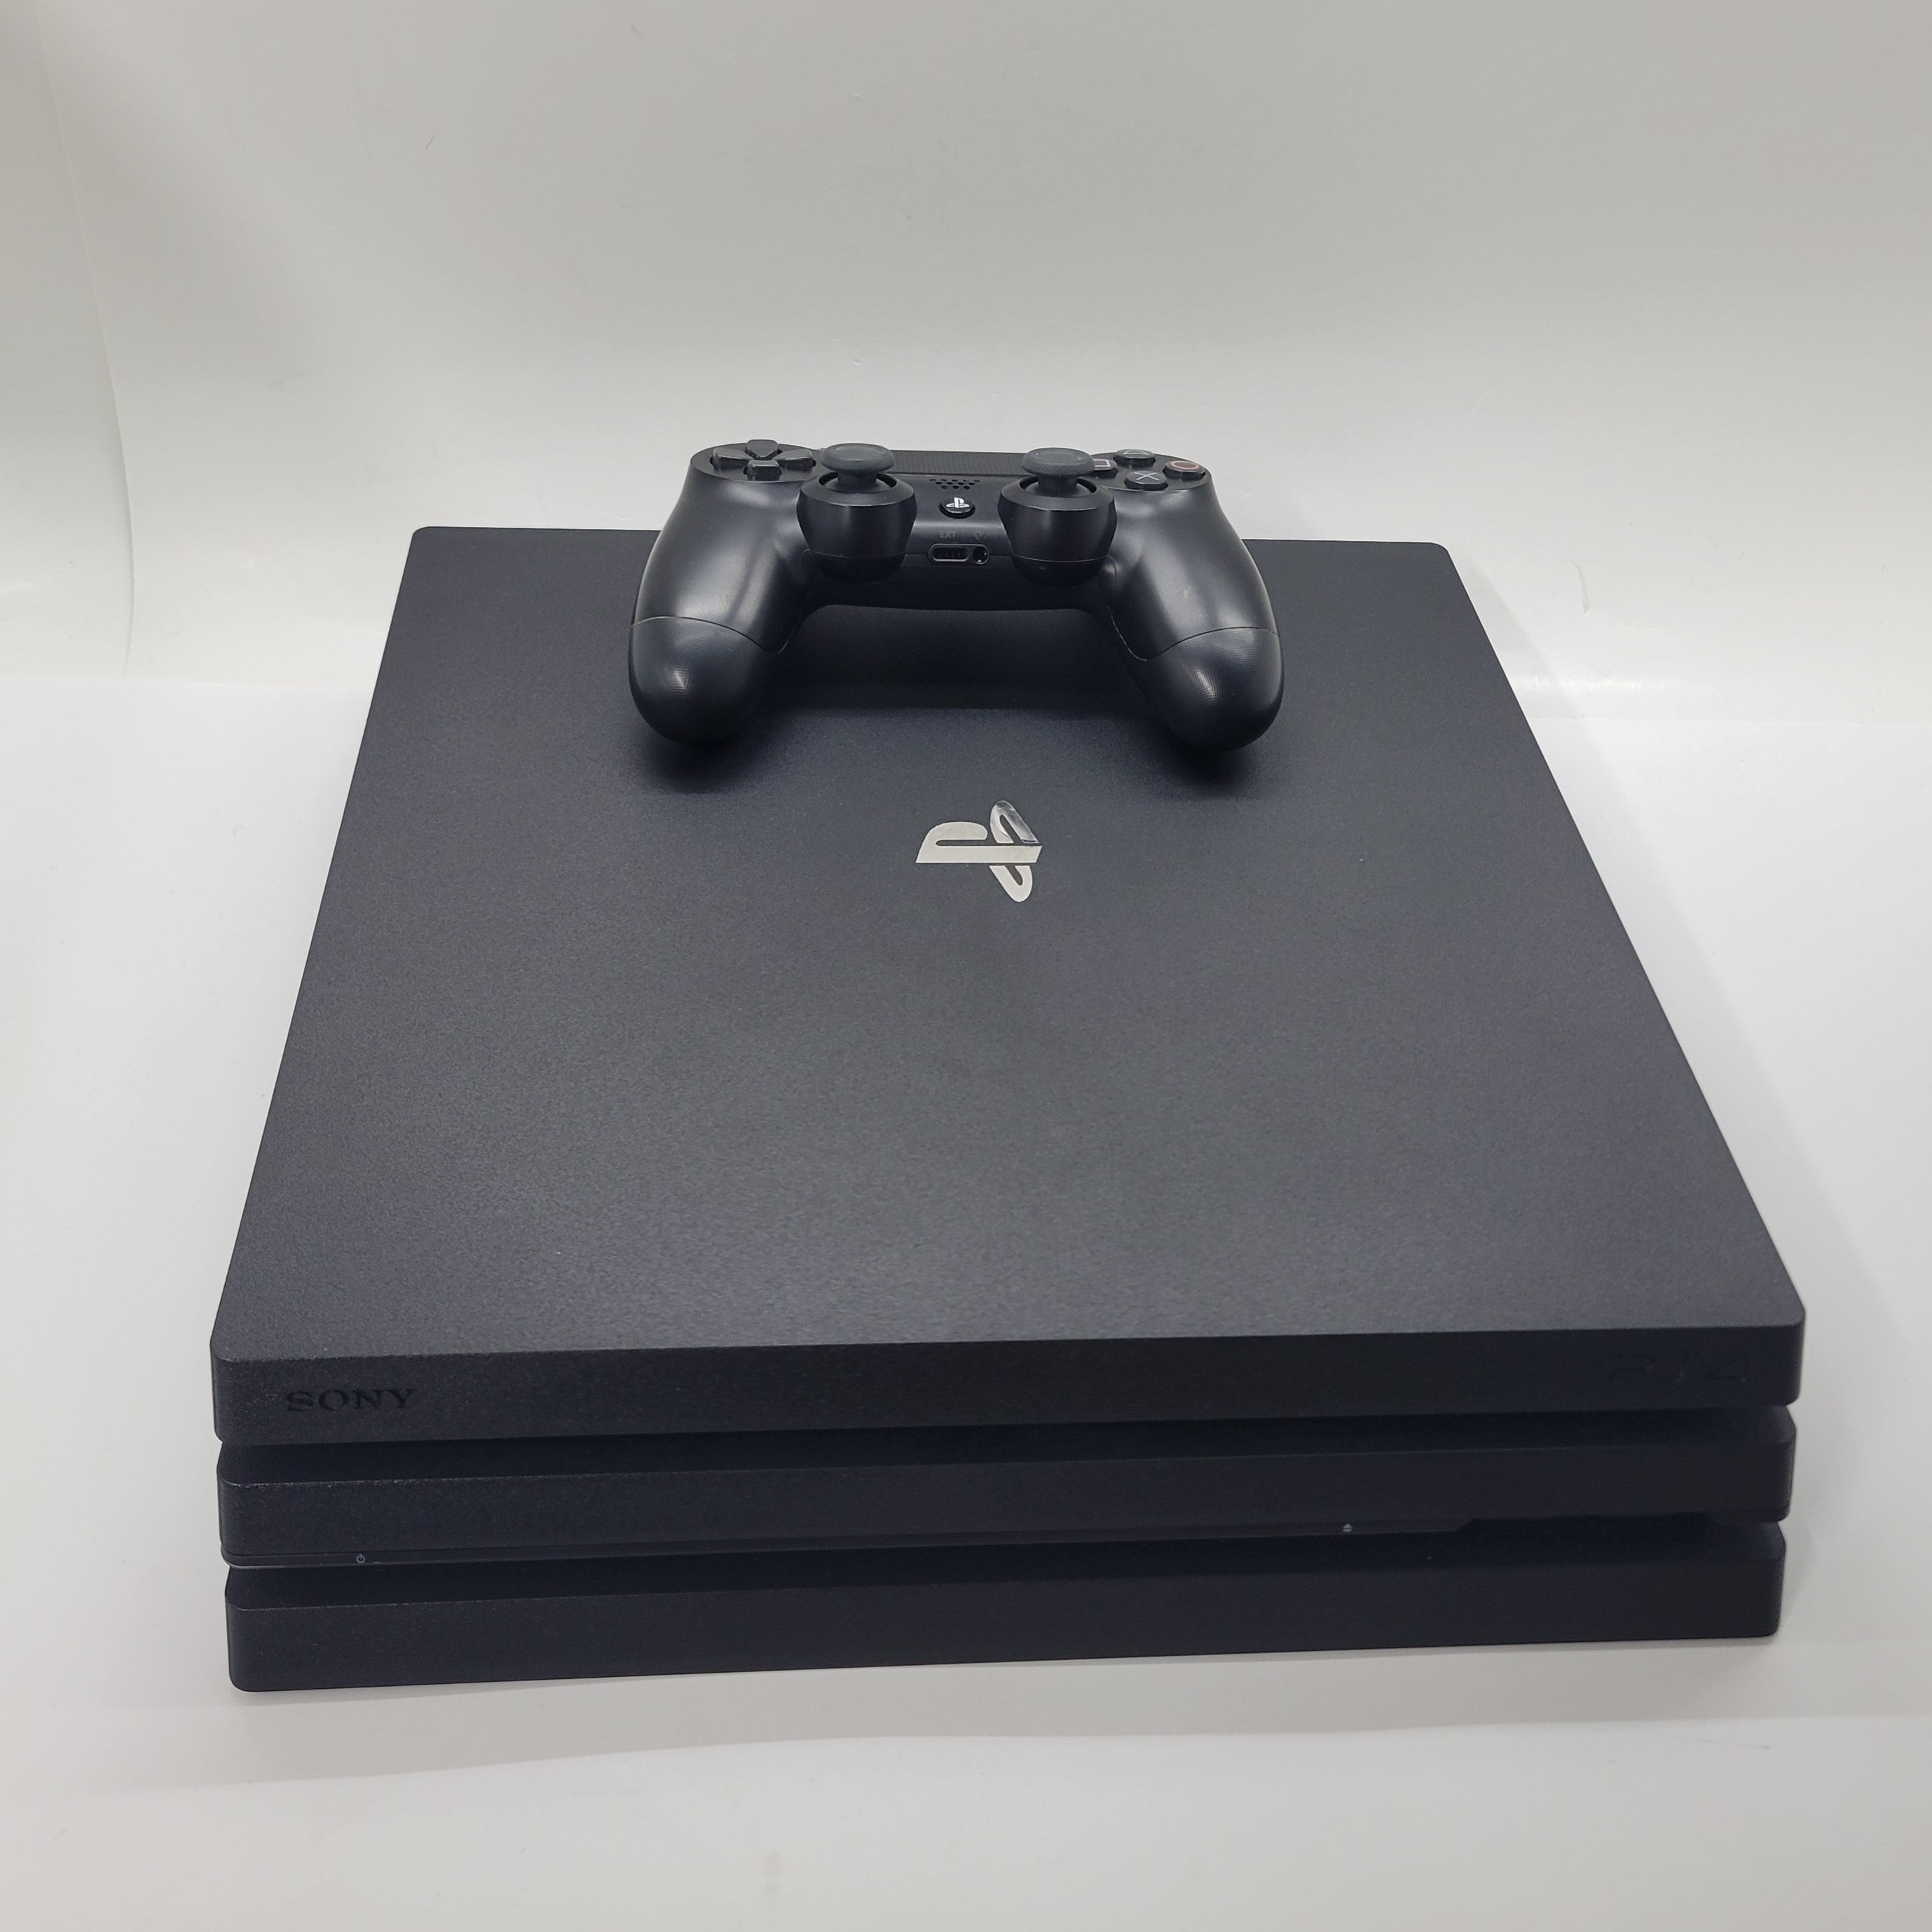 Sony PlayStation 4 Pro Console -Black- [Ready to Play - RTP] at GT